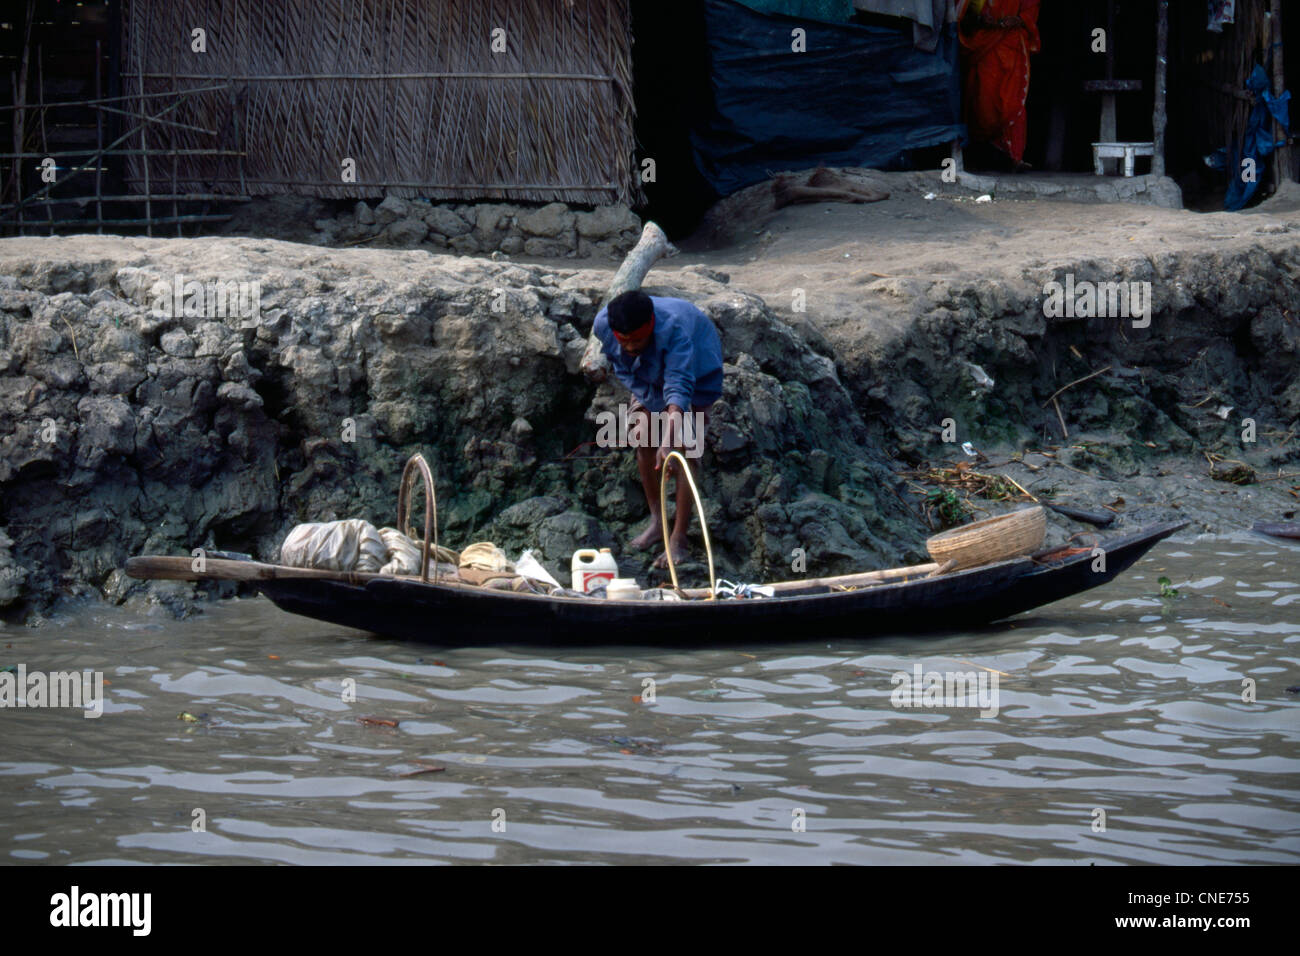 A man empties a small boat on the goods in Bangladesh Stock Photo